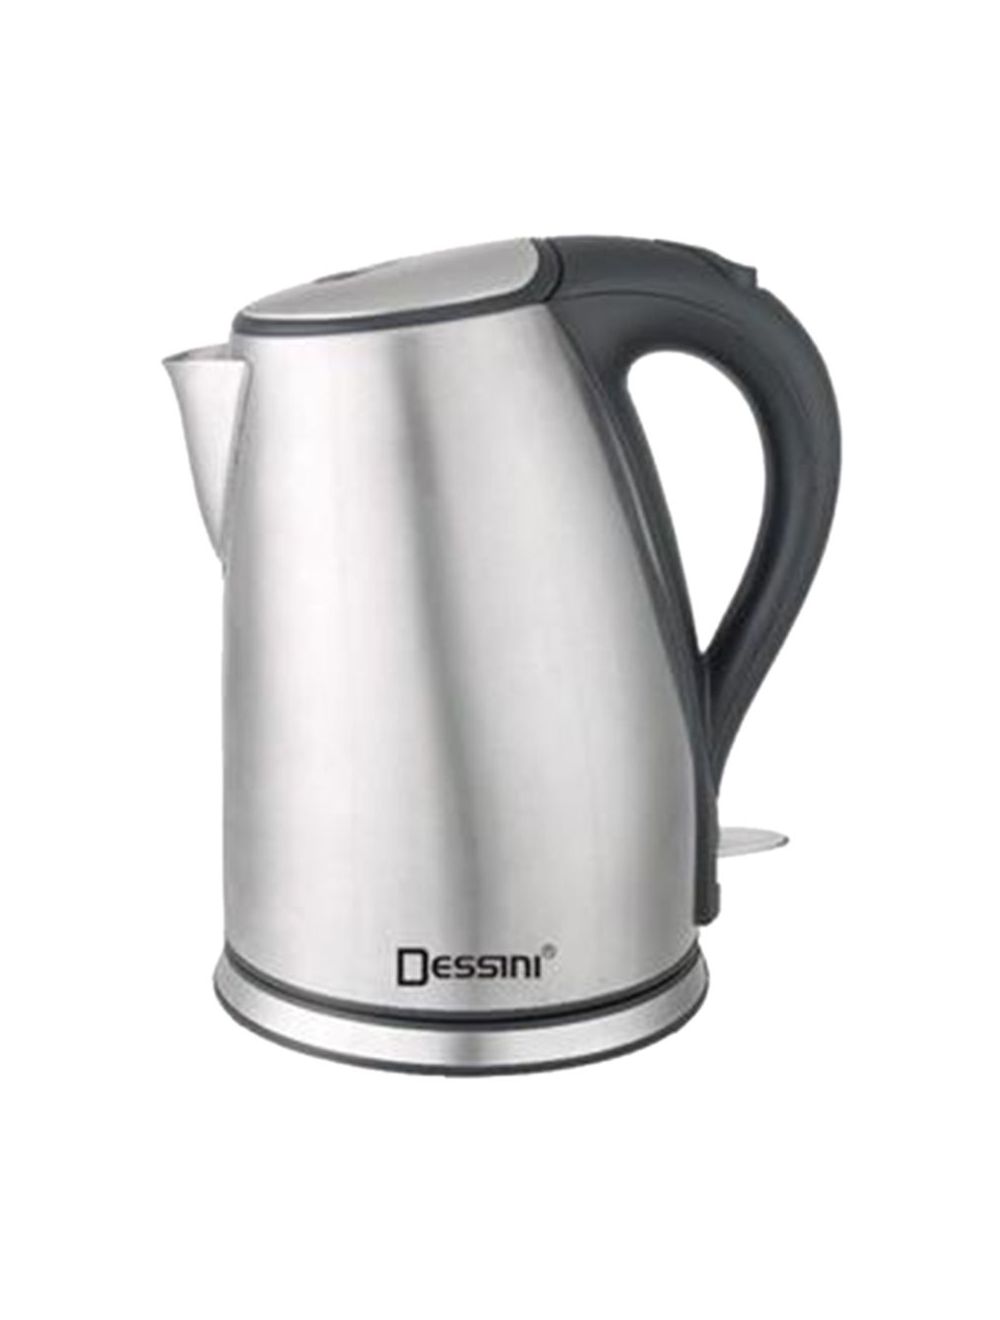 Dessini Stainless Steel Electric Kettle-AKAT121